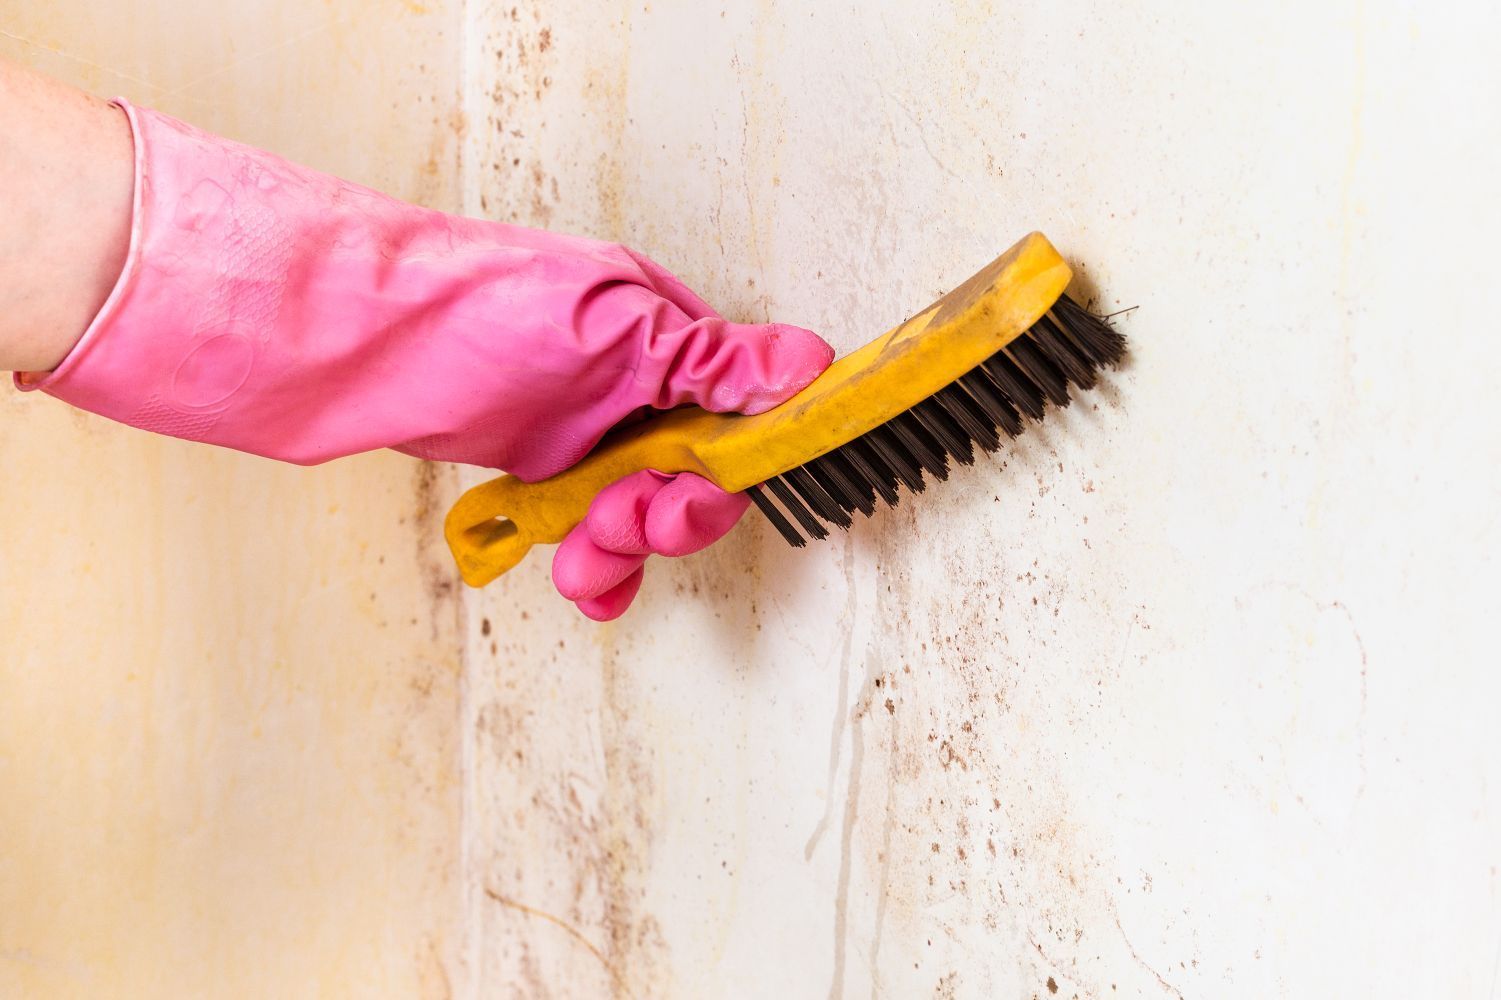 brushing-away-mold-from-wall